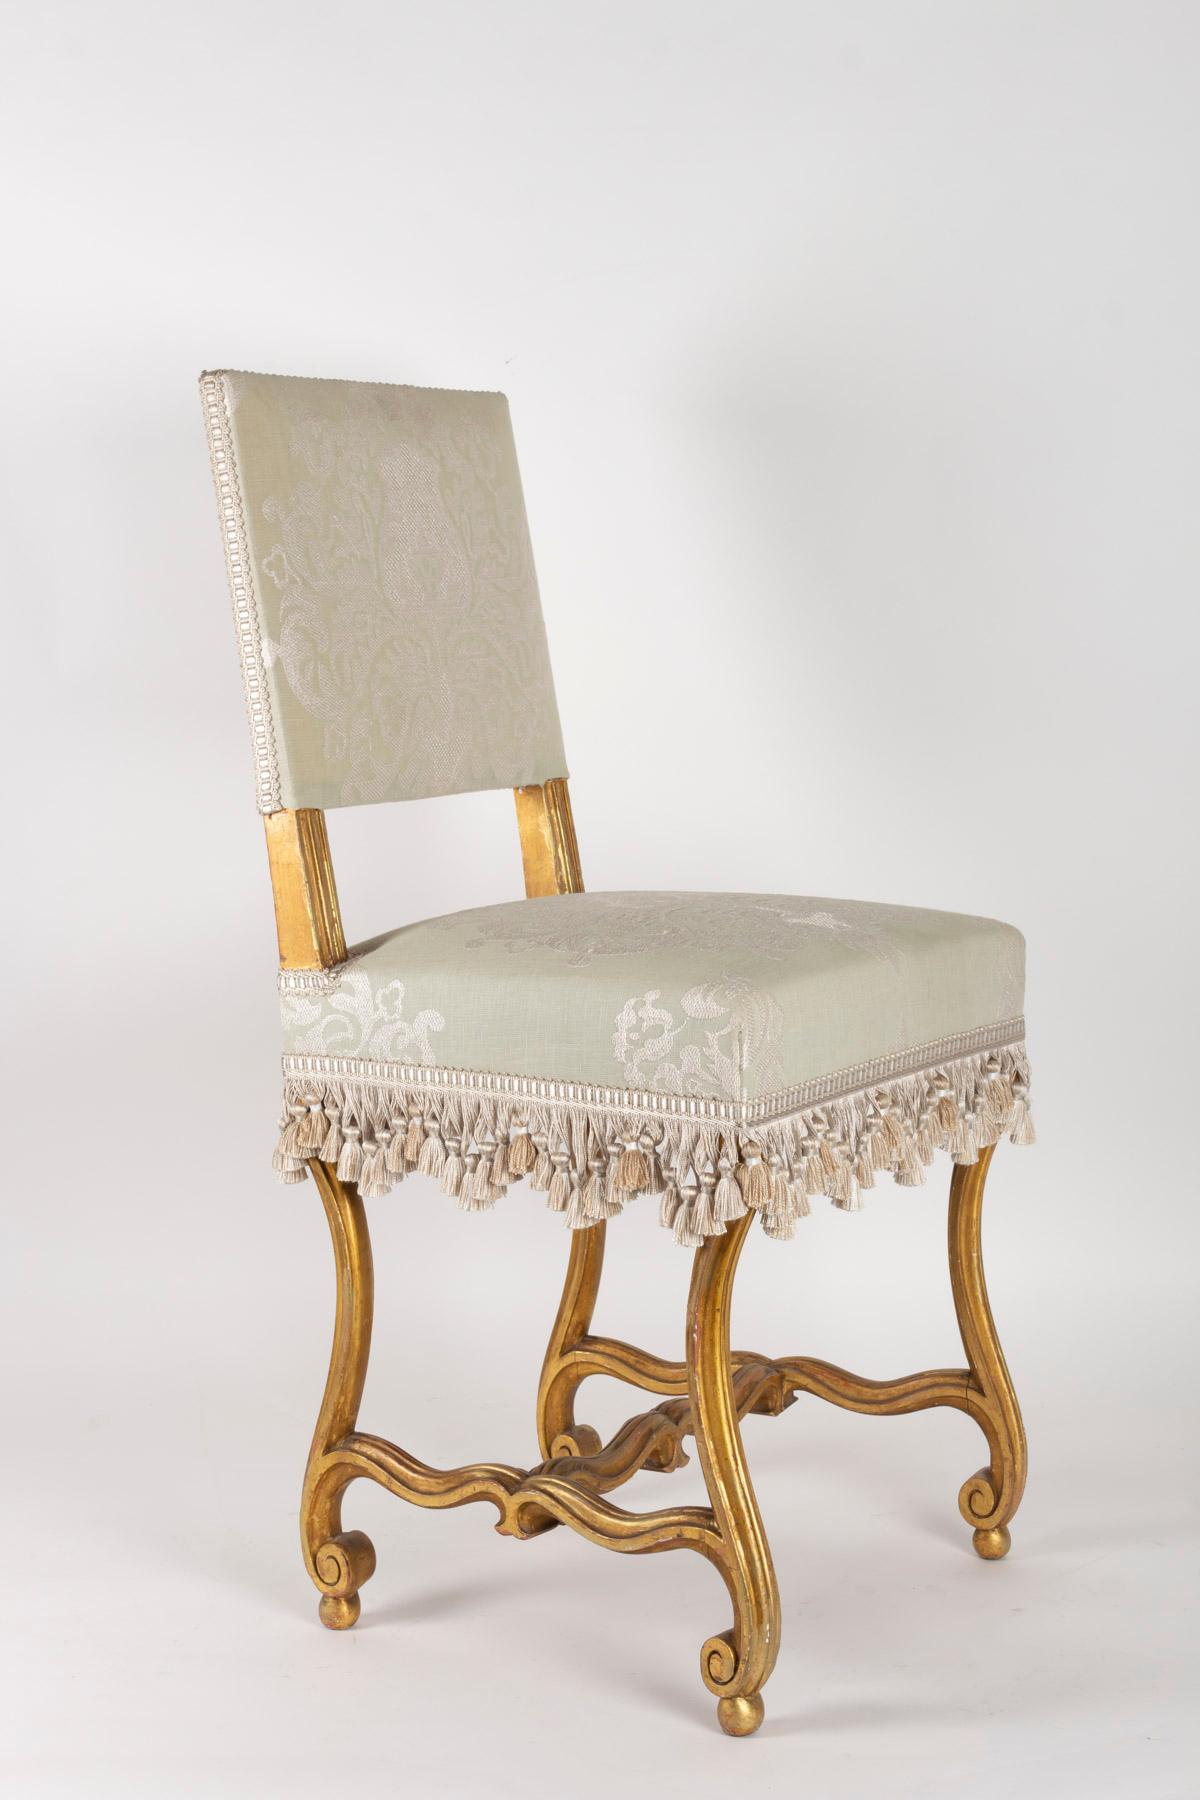 Pair of Chairs, Sheep Bones, Carved and Gilded Wooden, Napoleon III Period 6